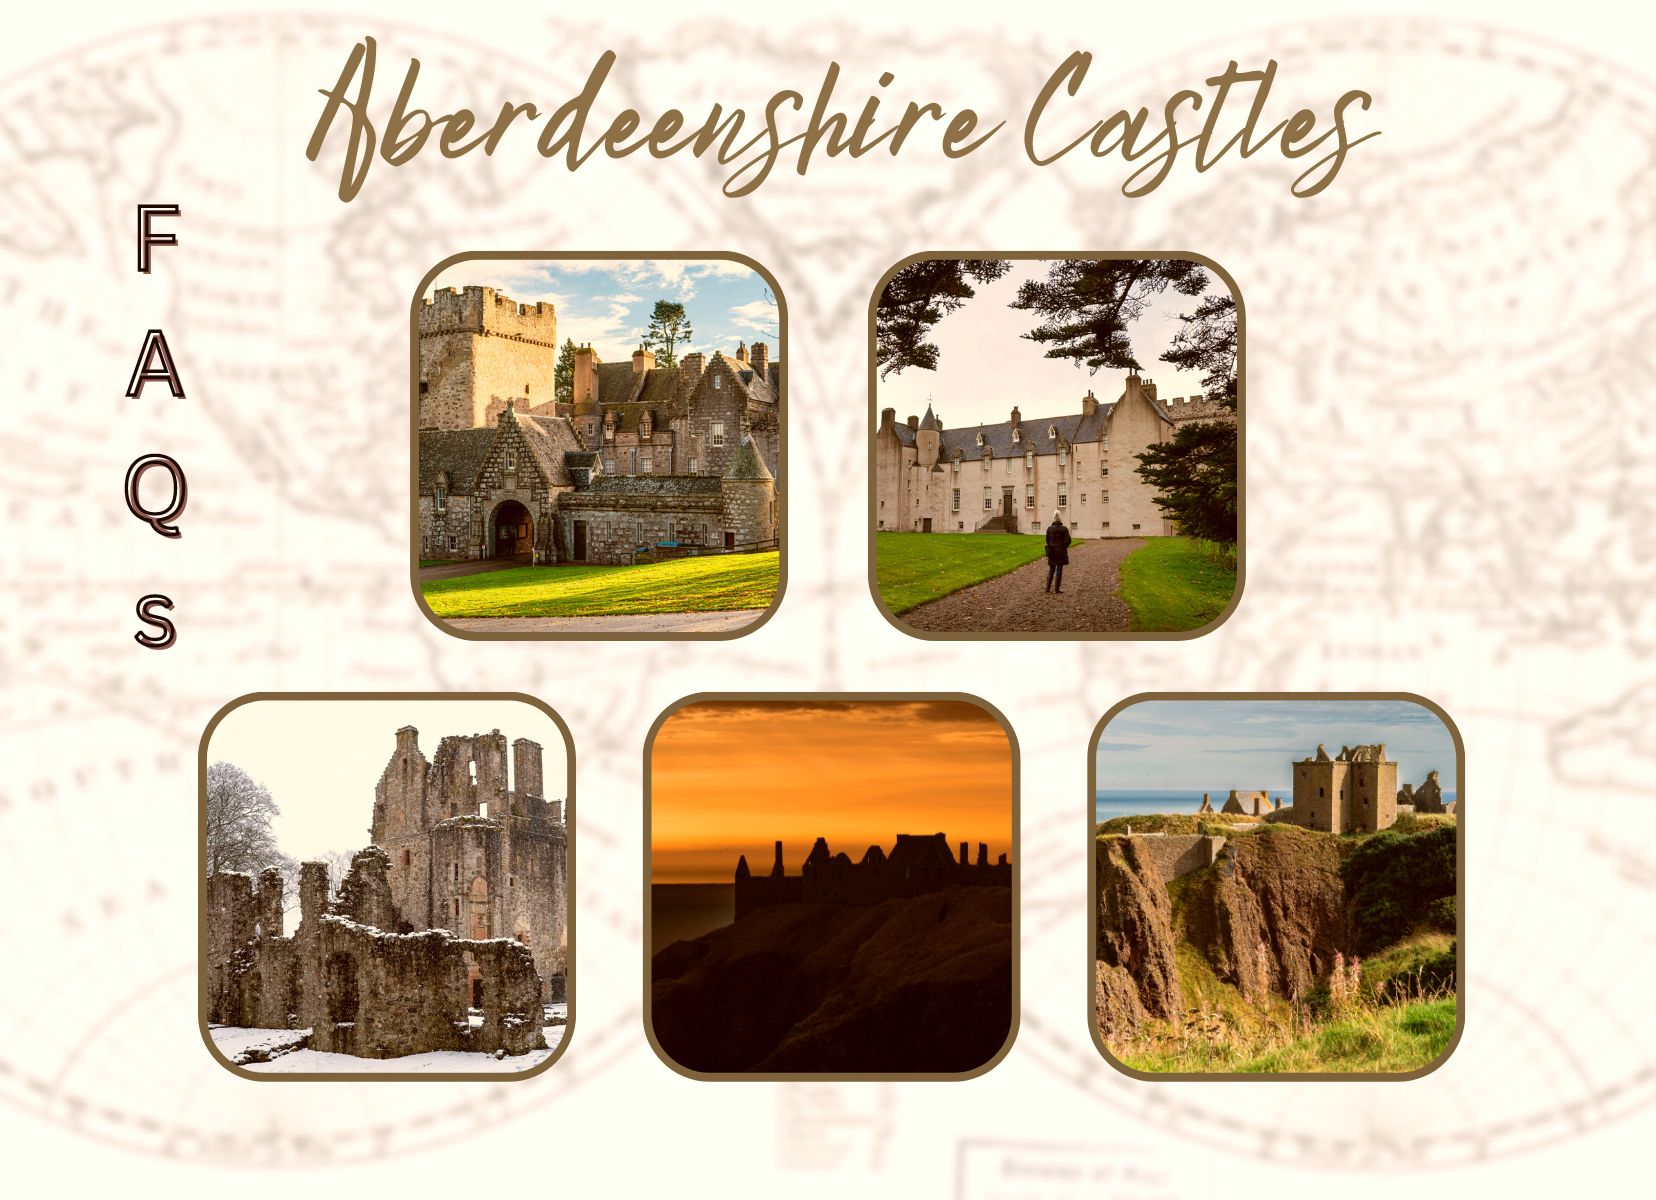 Aberdeenshire castles FAQs Image with five castles